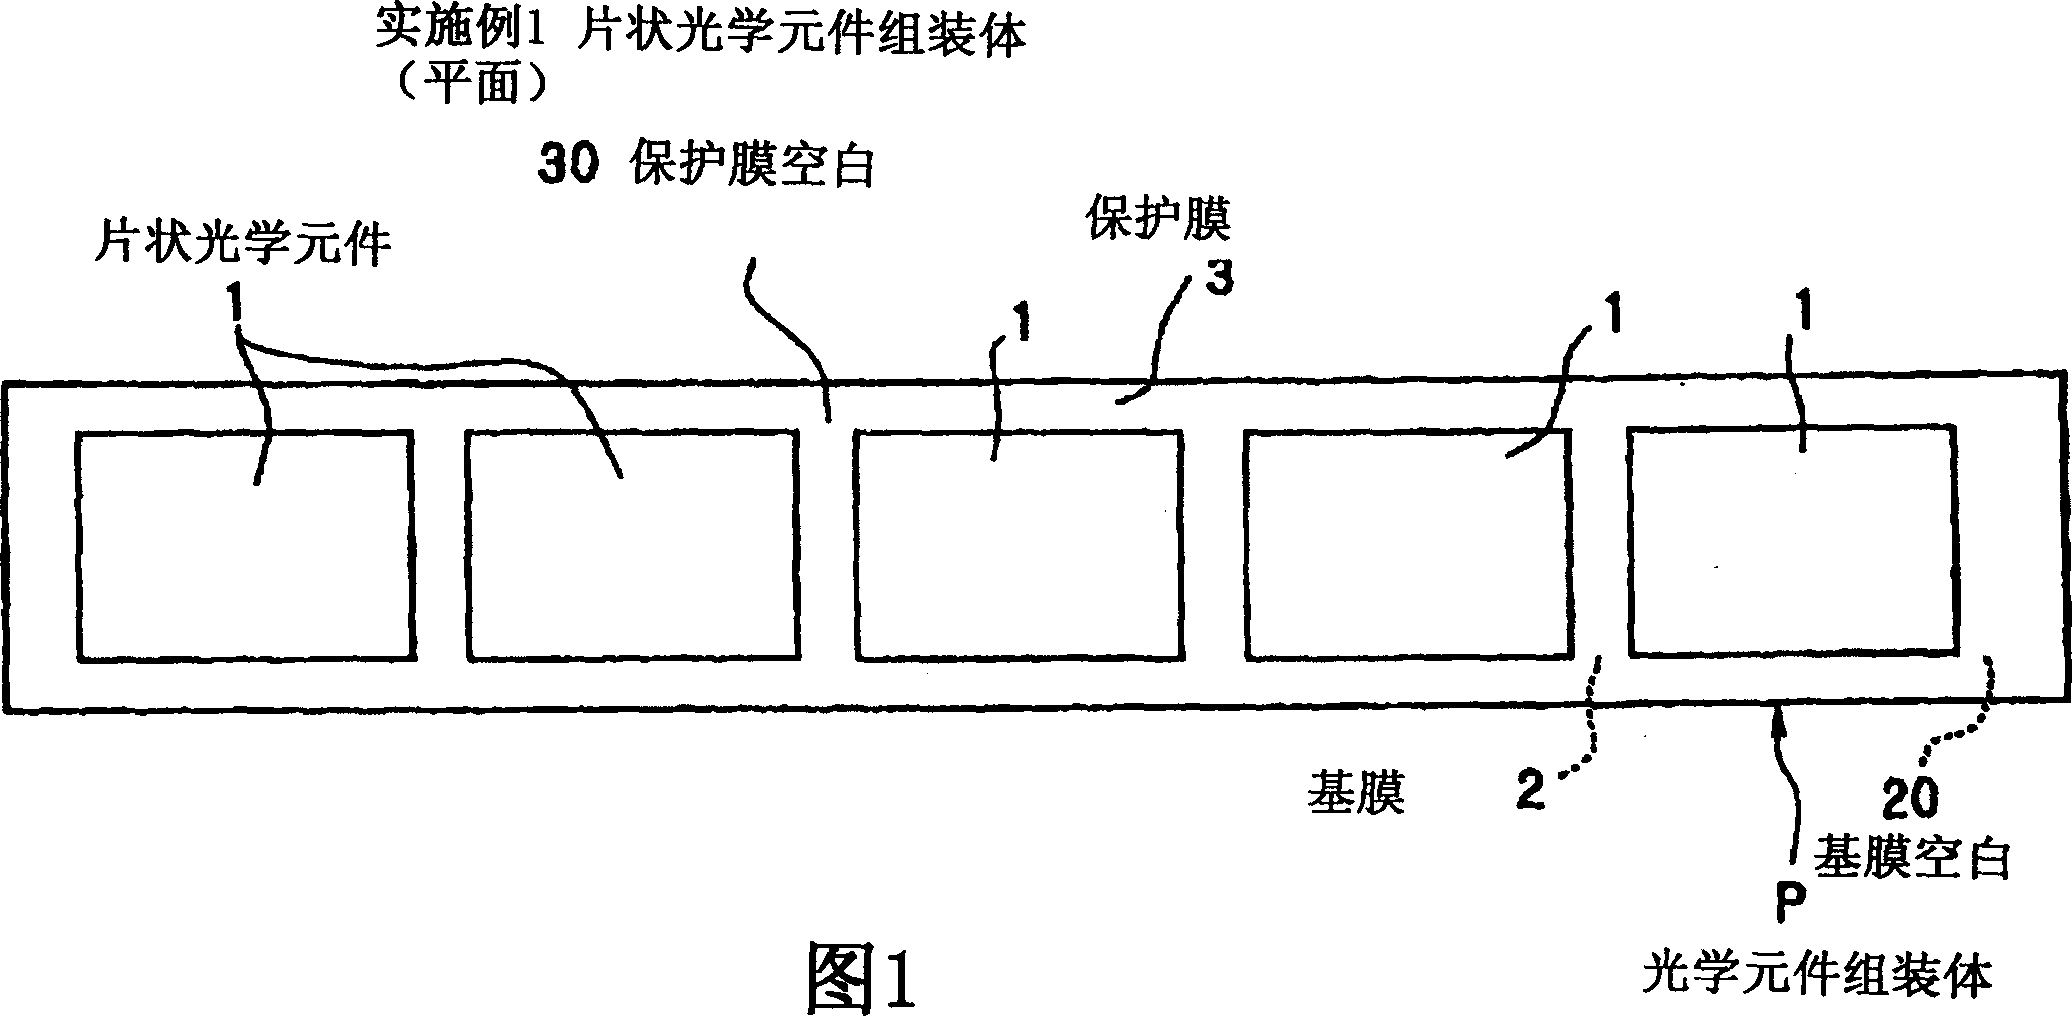 Sheet-form optical element package body, method of using sheet-form optical element, production method for sheet-form optical element package body, and production device for the same